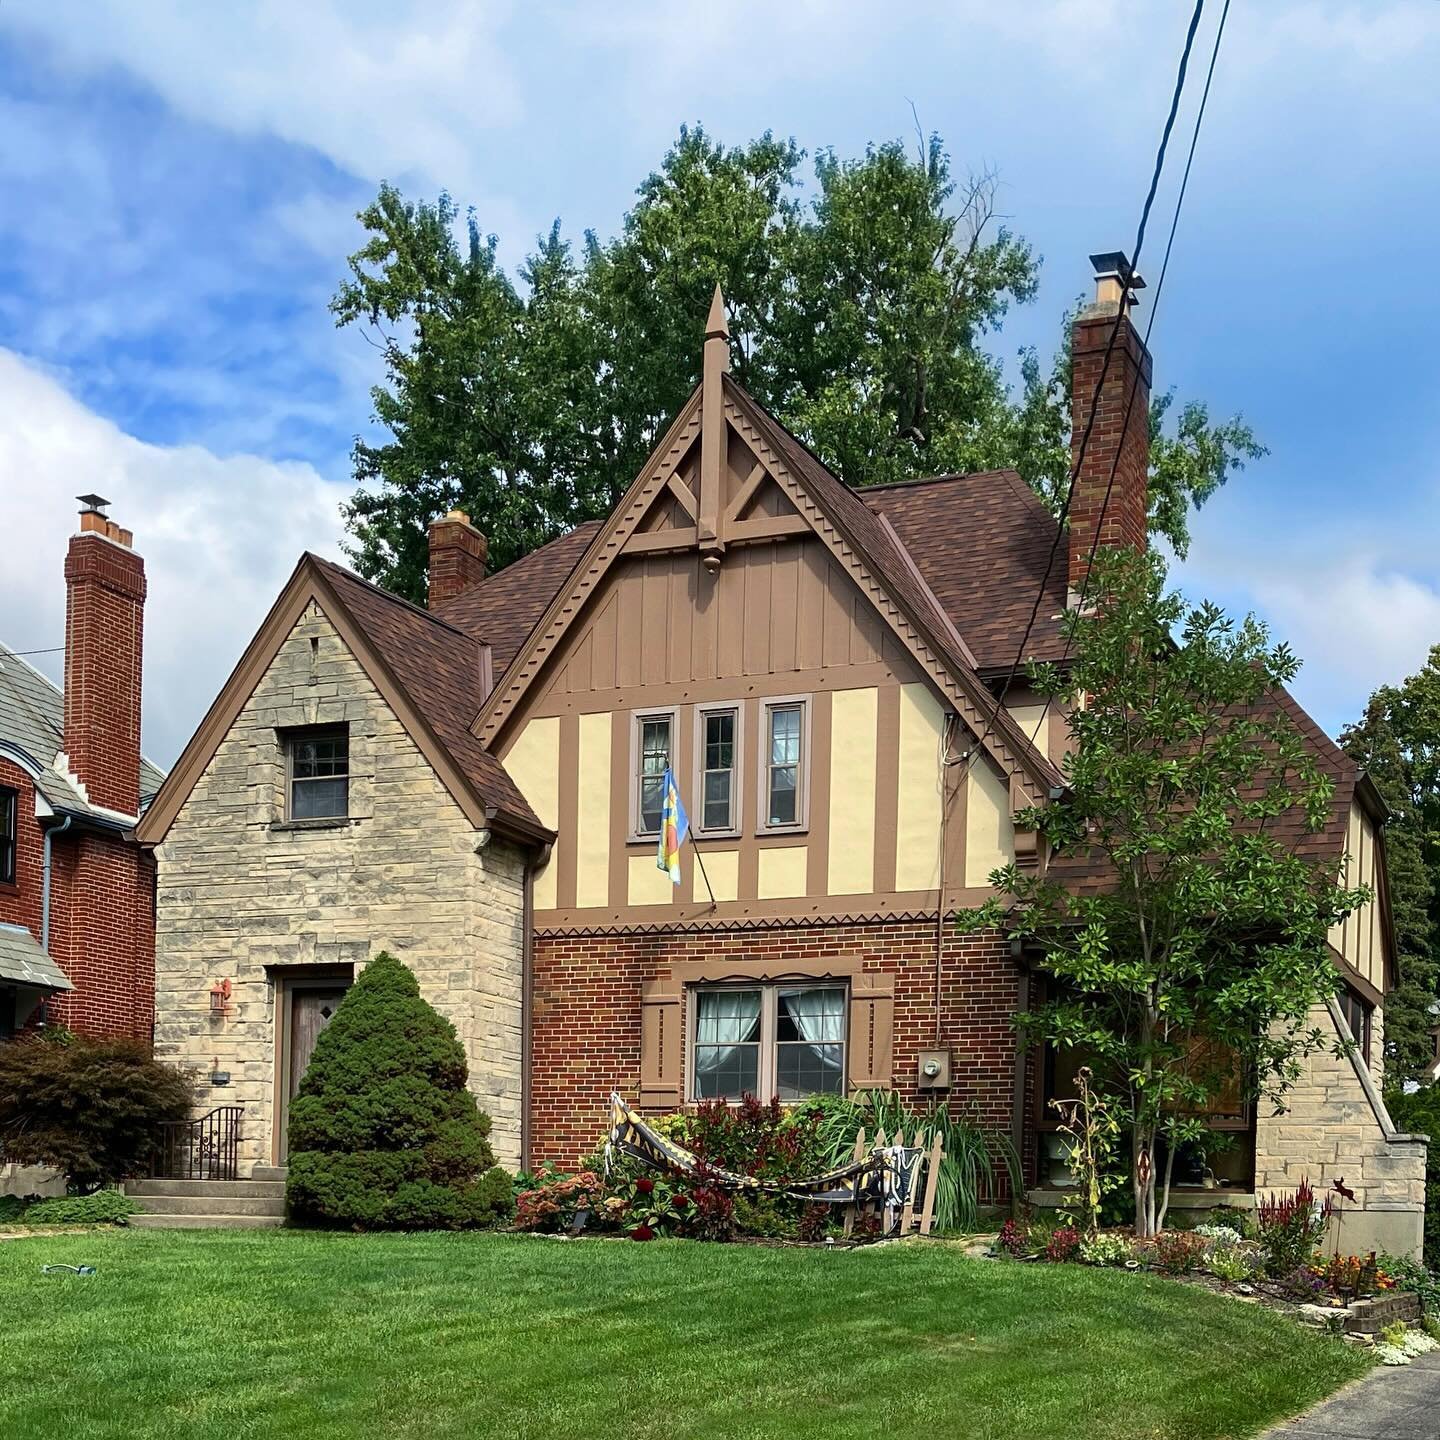 Today we&rsquo;re exploring some of the beautiful residential streets of Pleasant Ridge! This is a vibrant, walkable neighborhood approximately 9 miles from downtown Cincinnati, boasting affordable housing, award-winning parks and a lively mix of ind